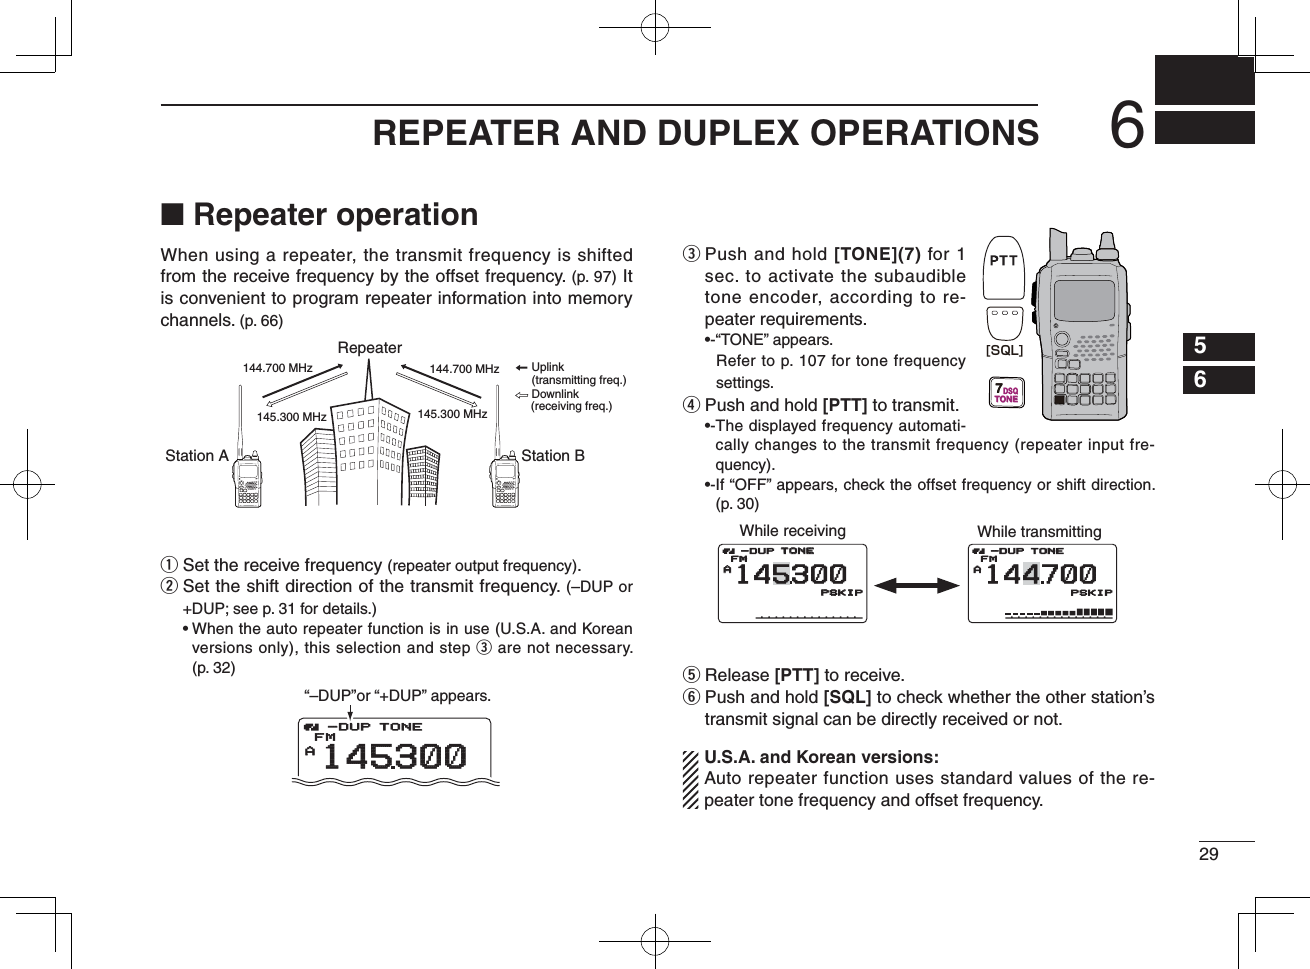 296REPEATER AND DUPLEX OPERATIONS12345678910111213141516171819■ Repeater operationWhen using a repeater, the transmit frequency is shifted from the receive frequency by the offset frequency. (p. 97) It is convenient to program repeater information into memory channels. (p. 66)q  Set the receive frequency (repeater output frequency).w  Set the shift direction of the transmit frequency. (–DUP or +DUP; see p. 31 for details.) •  When the auto repeater function is in use (U.S.A. and Korean versions only), this selection and step e are not necessary. (p. 32)e  Push and hold [TONE](7) for 1 sec. to activate the subaudible tone encoder, according to re-peater requirements. •-“TONE” appears.   Refer to p. 107 for tone frequency settings.r Push and hold [PTT] to transmit. •- The displayed frequency automati-cally changes to the transmit frequency (repeater input fre-quency). •- If “OFF” appears, check the offset frequency or shift direction. (p. 30)t Release [PTT] to receive.y  Push and hold [SQL] to check whether the other station’s transmit signal can be directly received or not. U.S.A. and Korean versions:  Auto repeater function uses standard values of the re-peater tone frequency and offset frequency.Station A Station BRepeater145.300 MHz144.700 MHz 144.700 MHz145.300 MHzUplinkDownlink(transmitting freq.)(receiving freq.)ATONETONEFM145300-DUP-DUP“–DUP”or “+DUP” appears.7TONEDSQ[SQL]While receiving While transmittingAATONETONEFMPSKIPSKIP-DUPATONEFM144700PSKIP-DUP145300